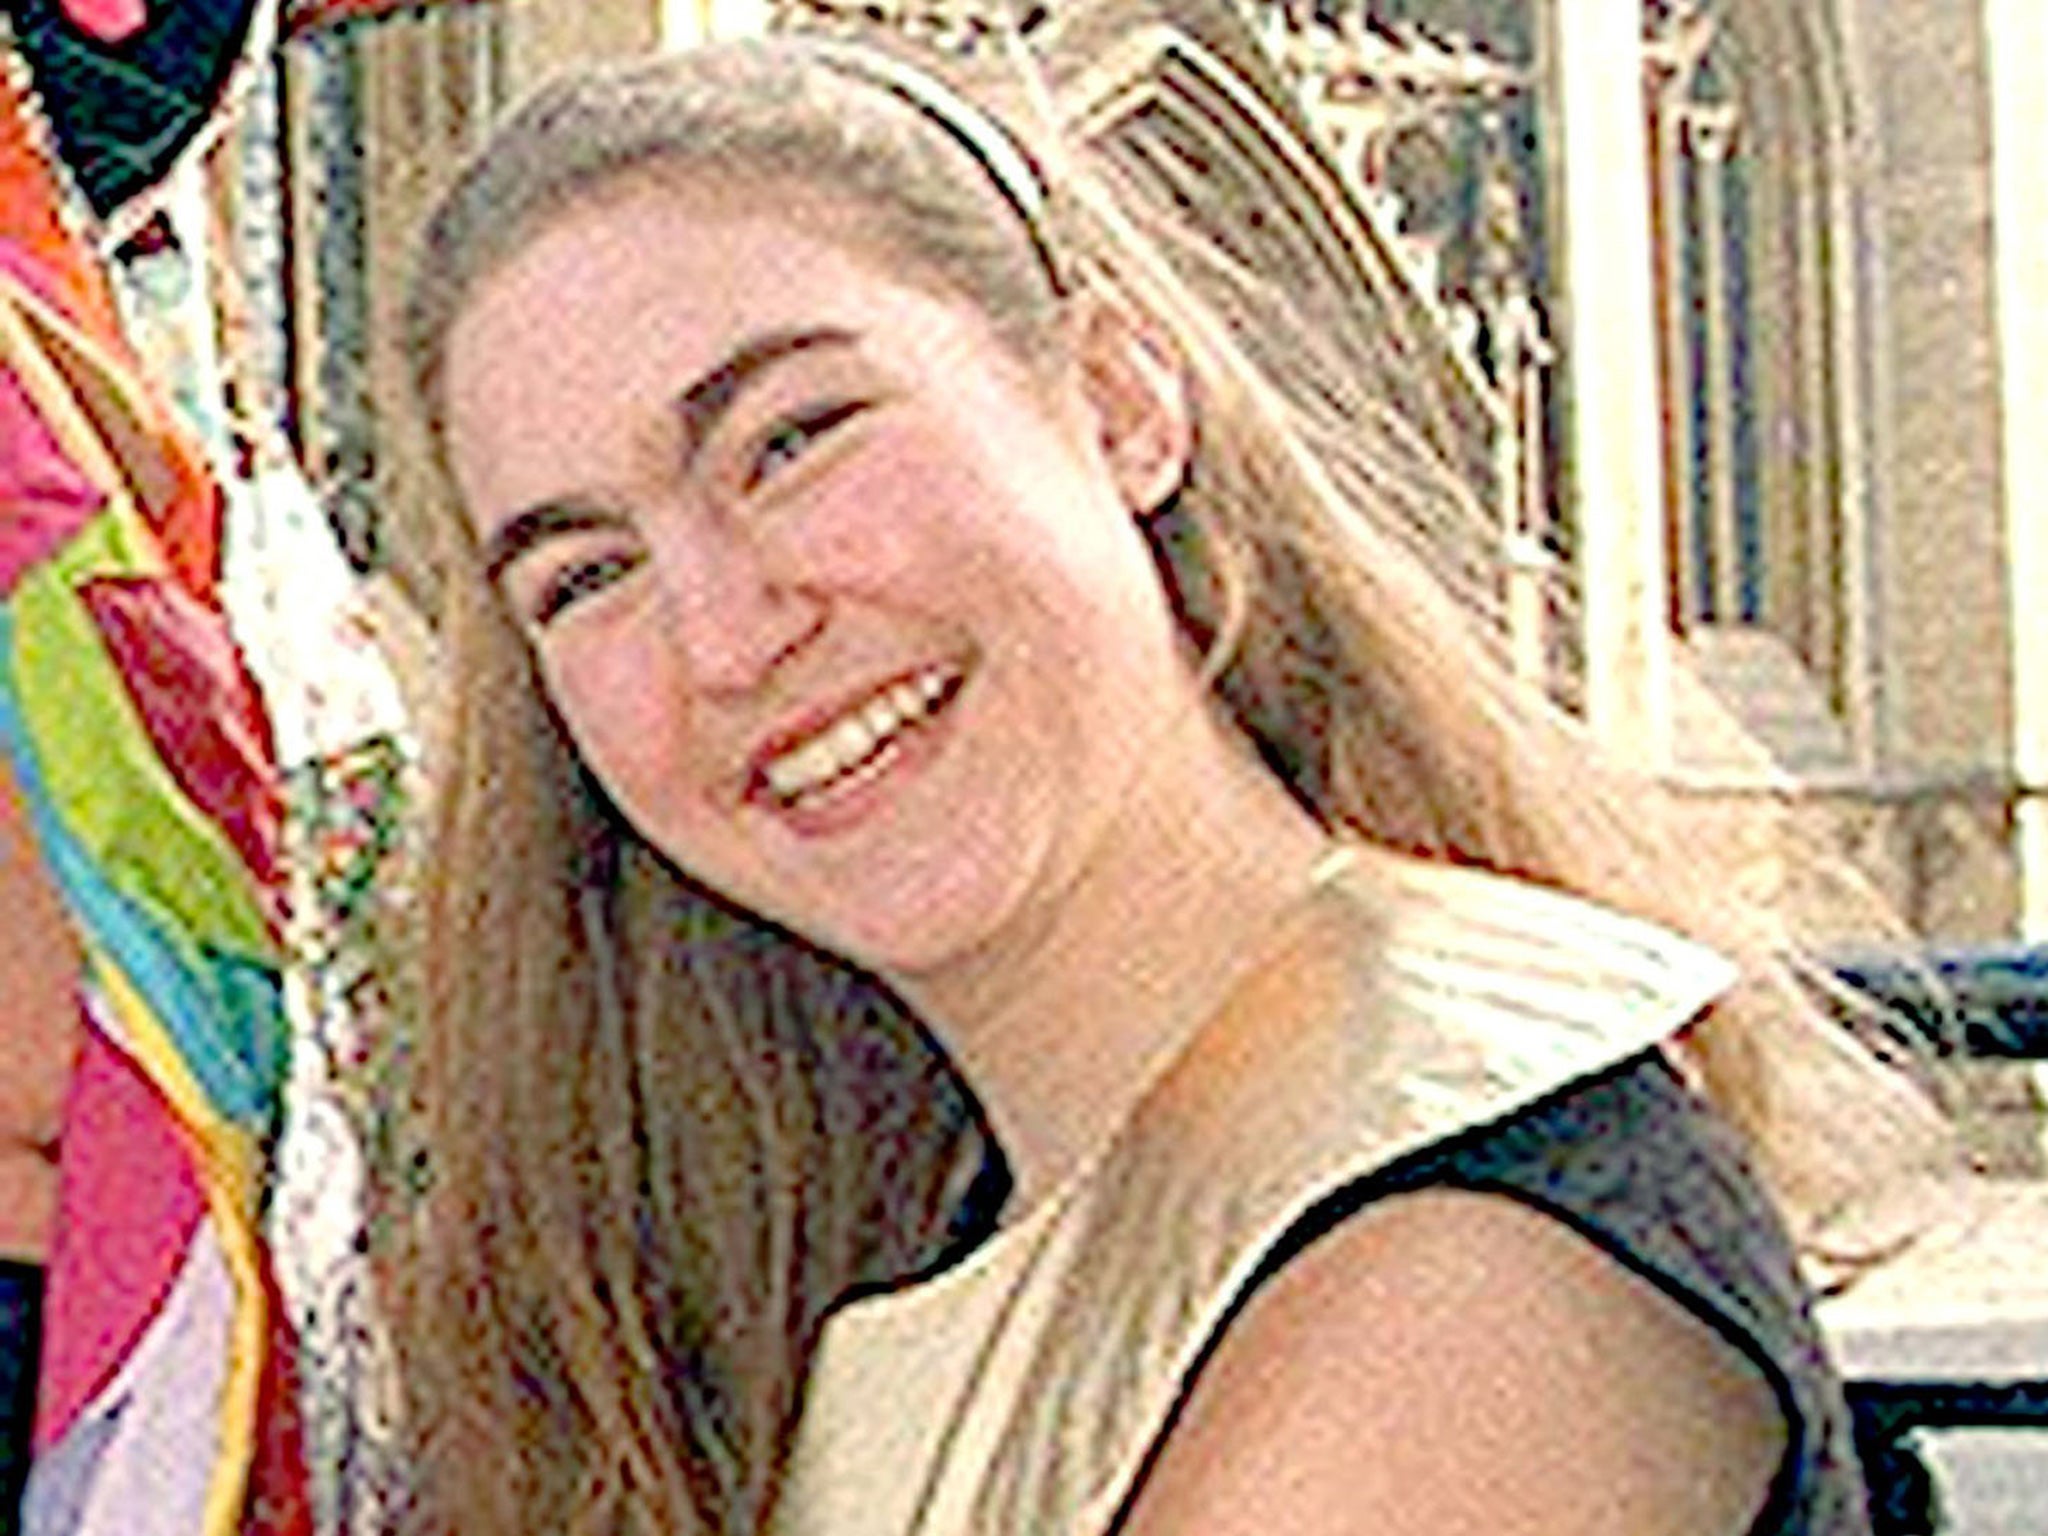 Jenny Nicholson went missing after the 7/7 London bombings